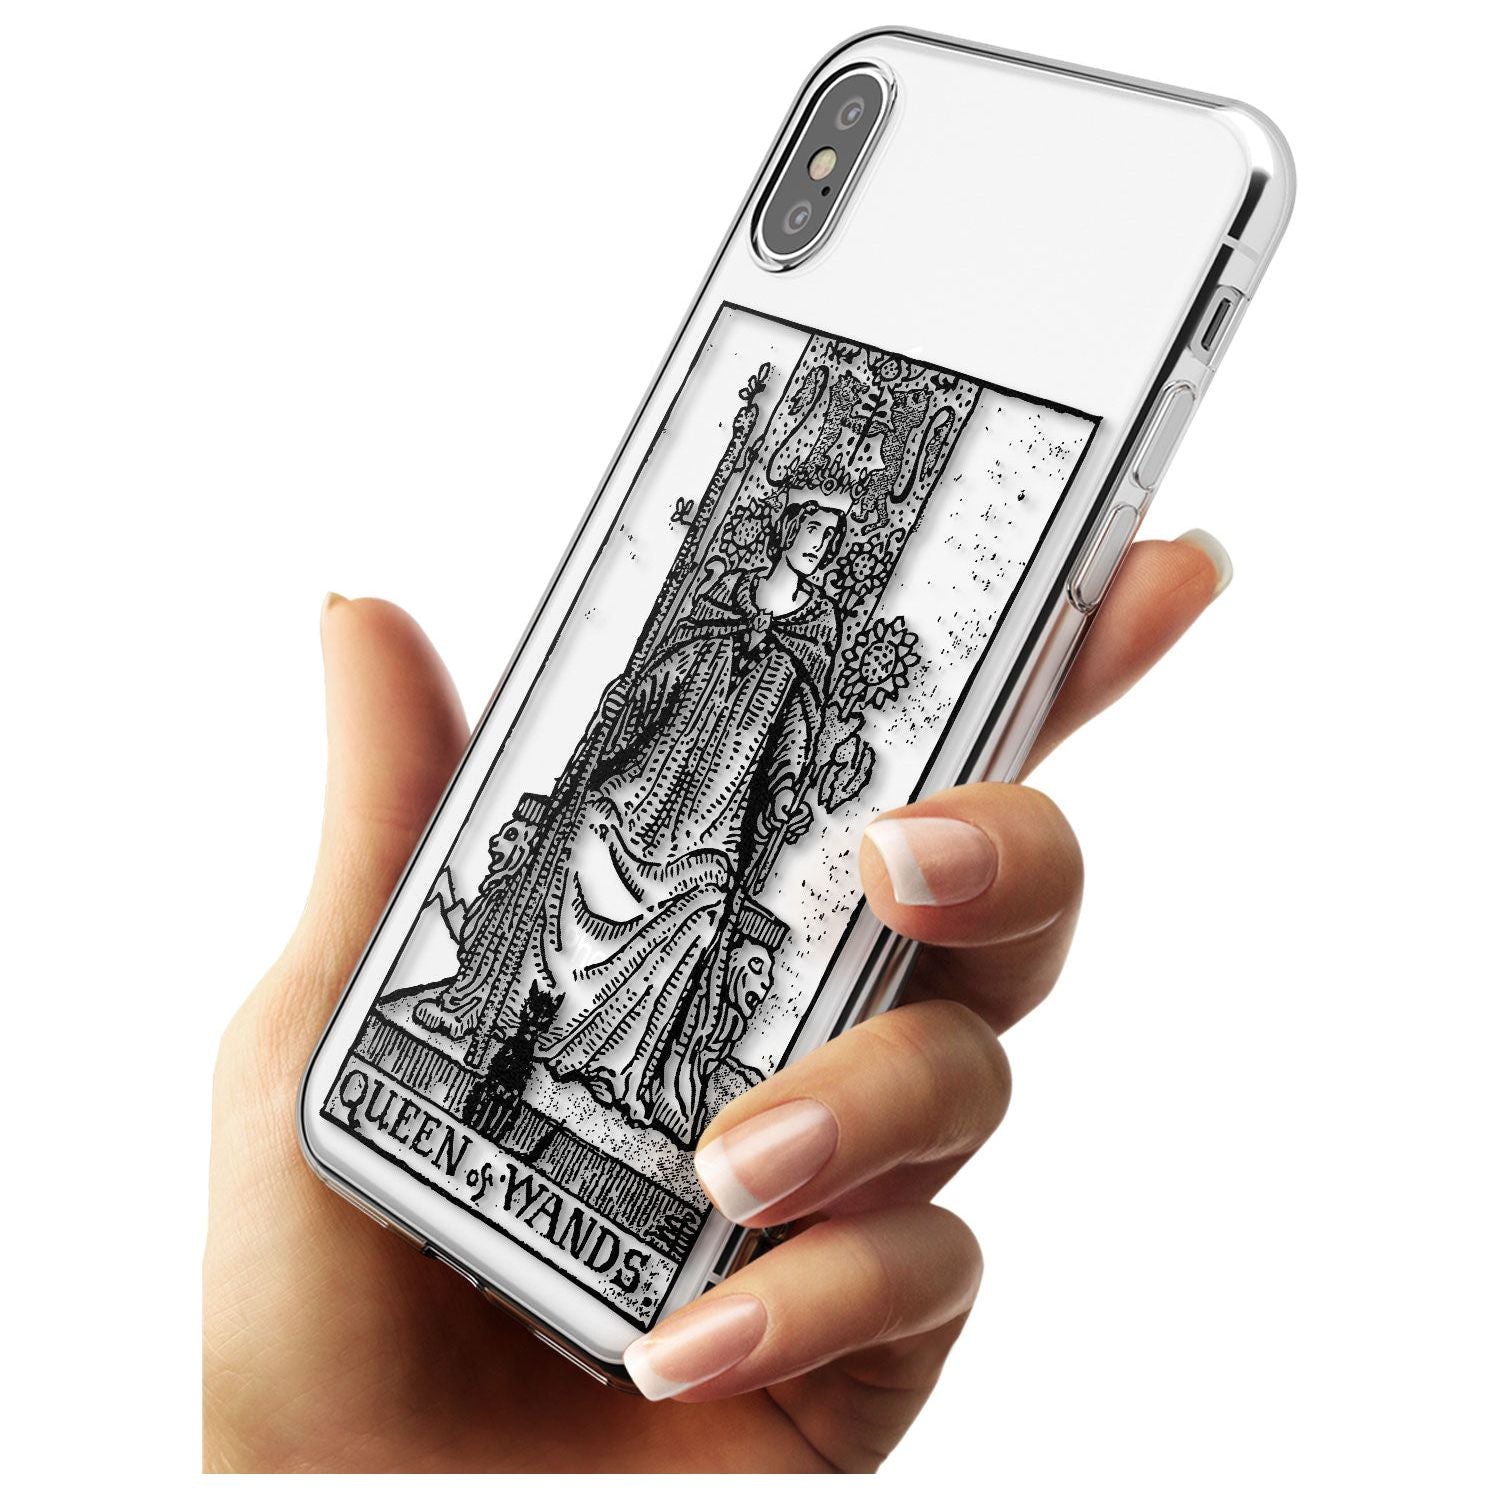 Queen of Wands Tarot Card - Transparent Black Impact Phone Case for iPhone X XS Max XR